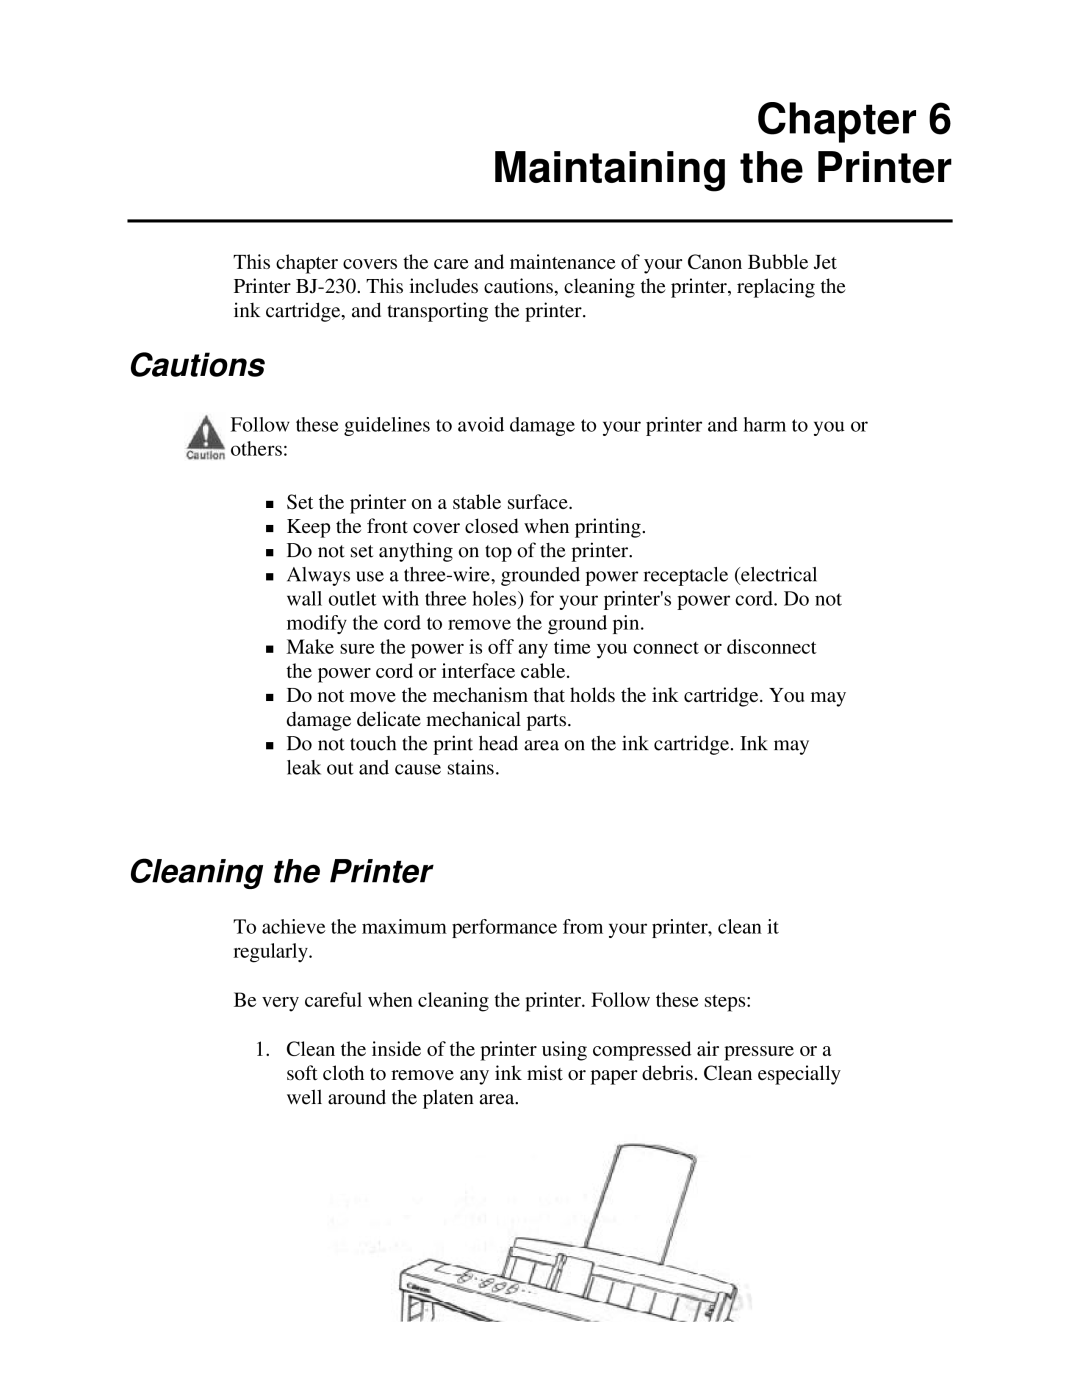 Canon BJ-230 user manual Chapter Maintaining the Printer, Cautions, Cleaning the Printer 